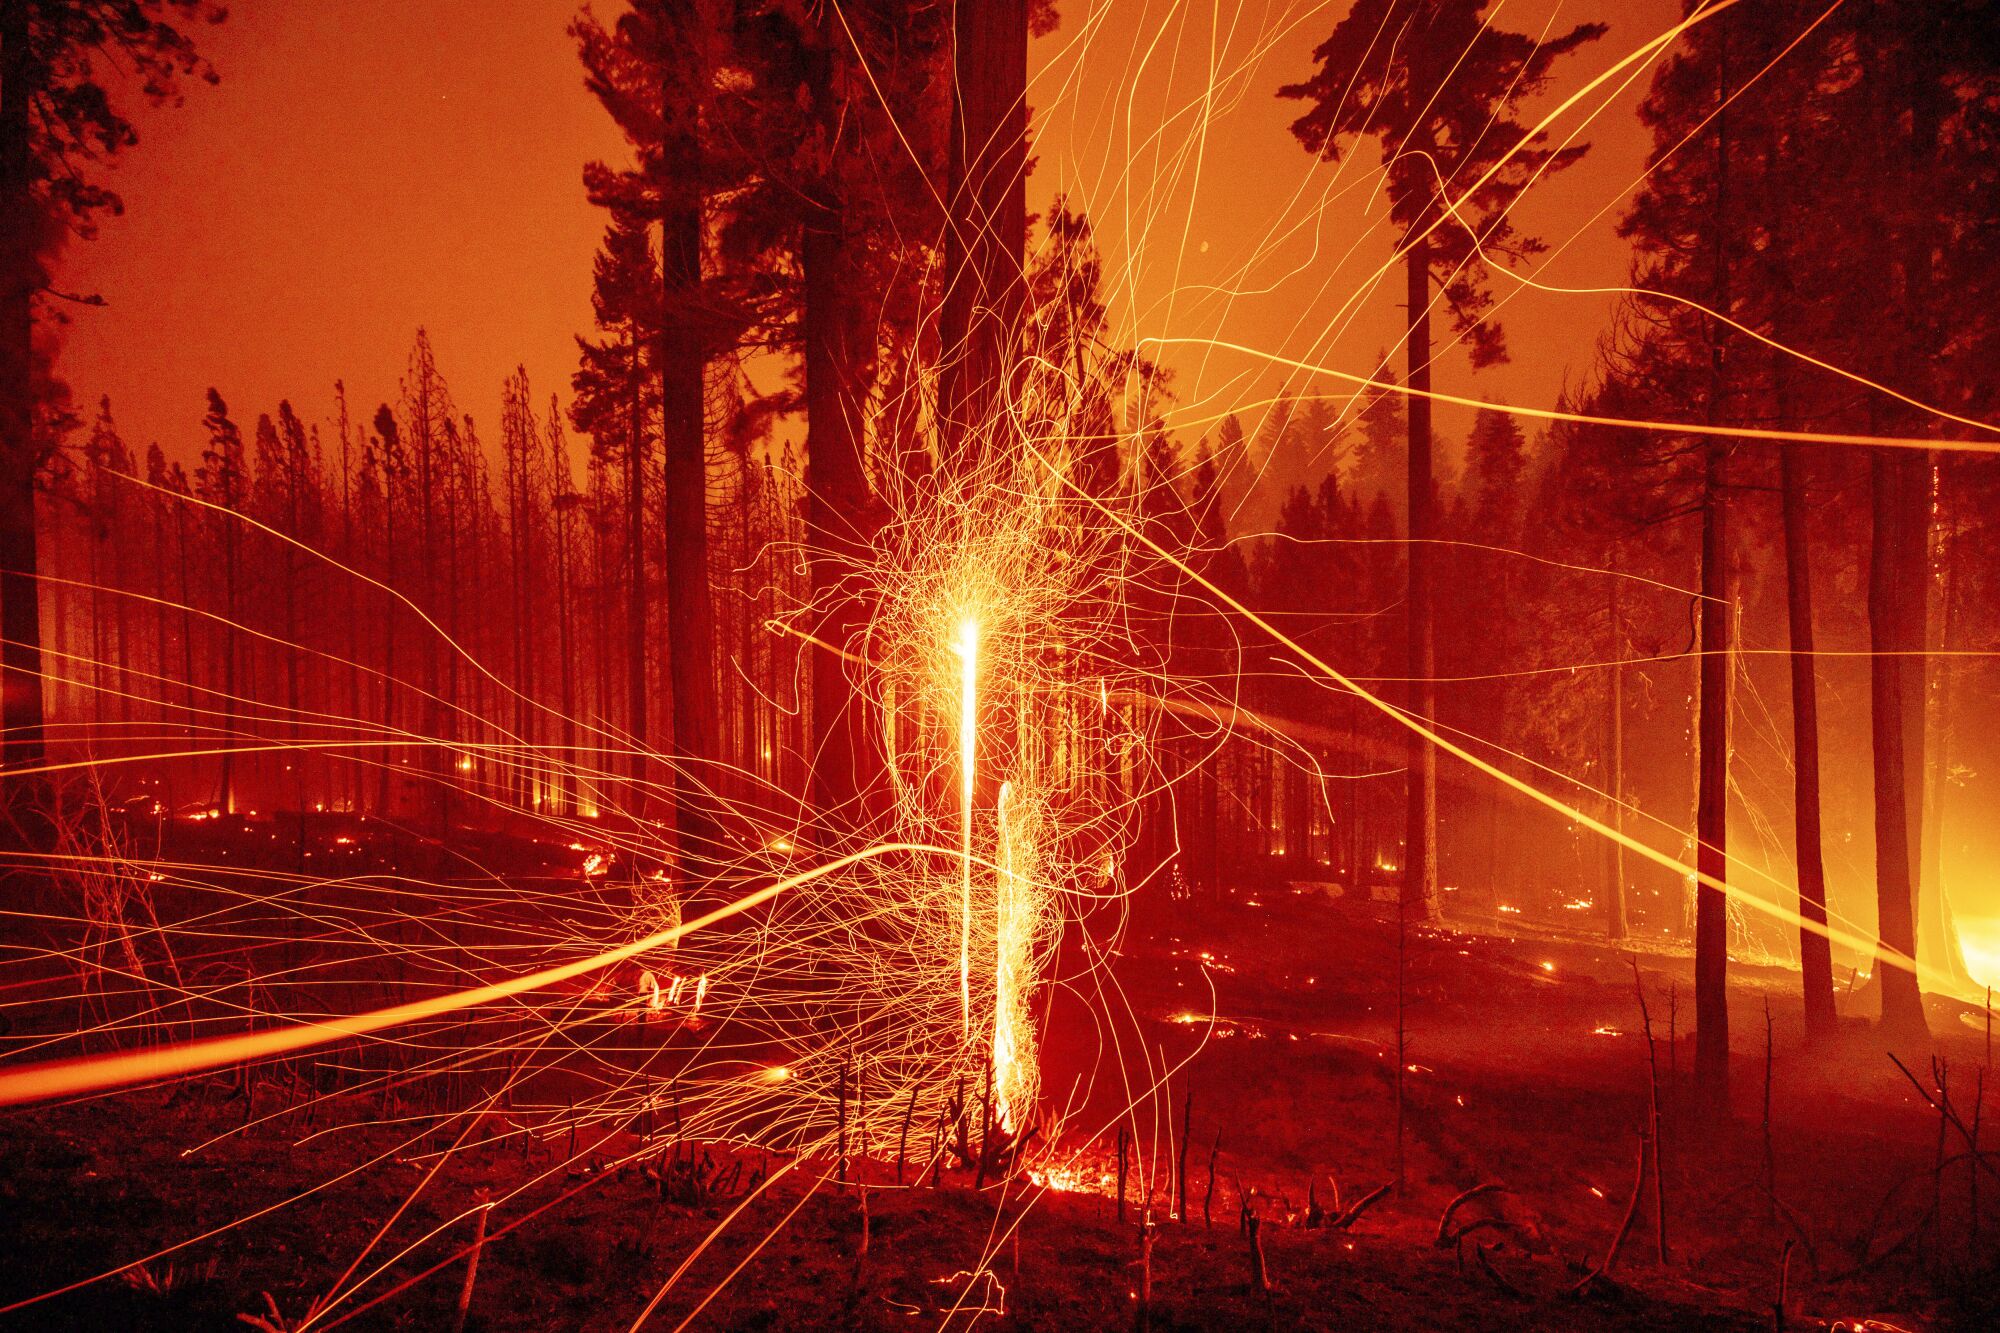 Glowing embers fly from burning trees.